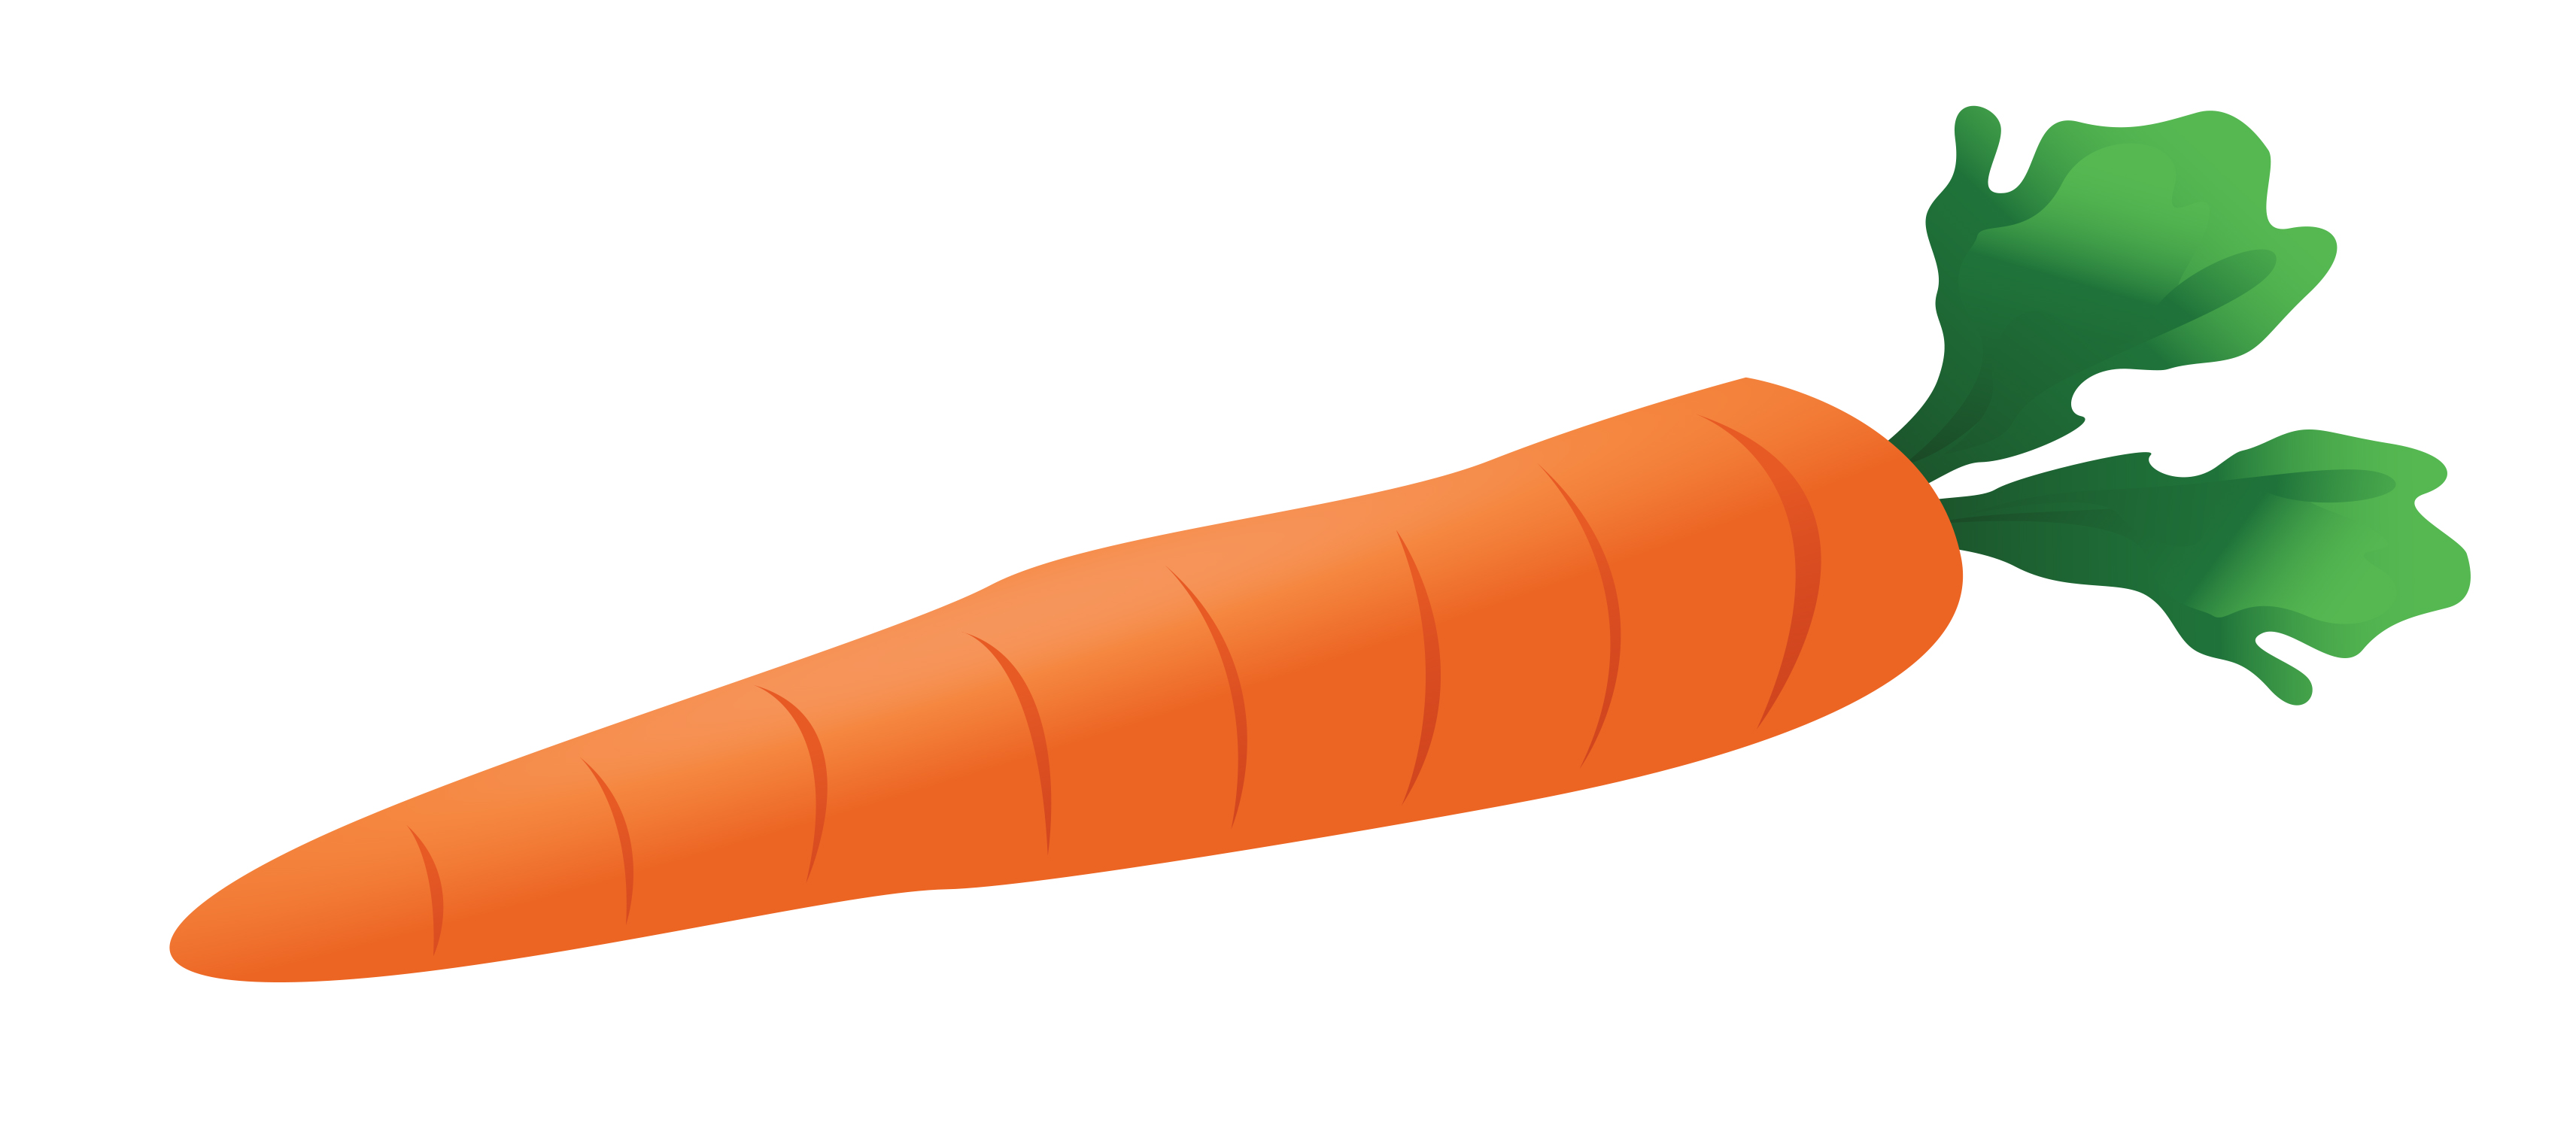 View Carrot.jpg Clipart - Free Nutrition and Healthy Food Clipart